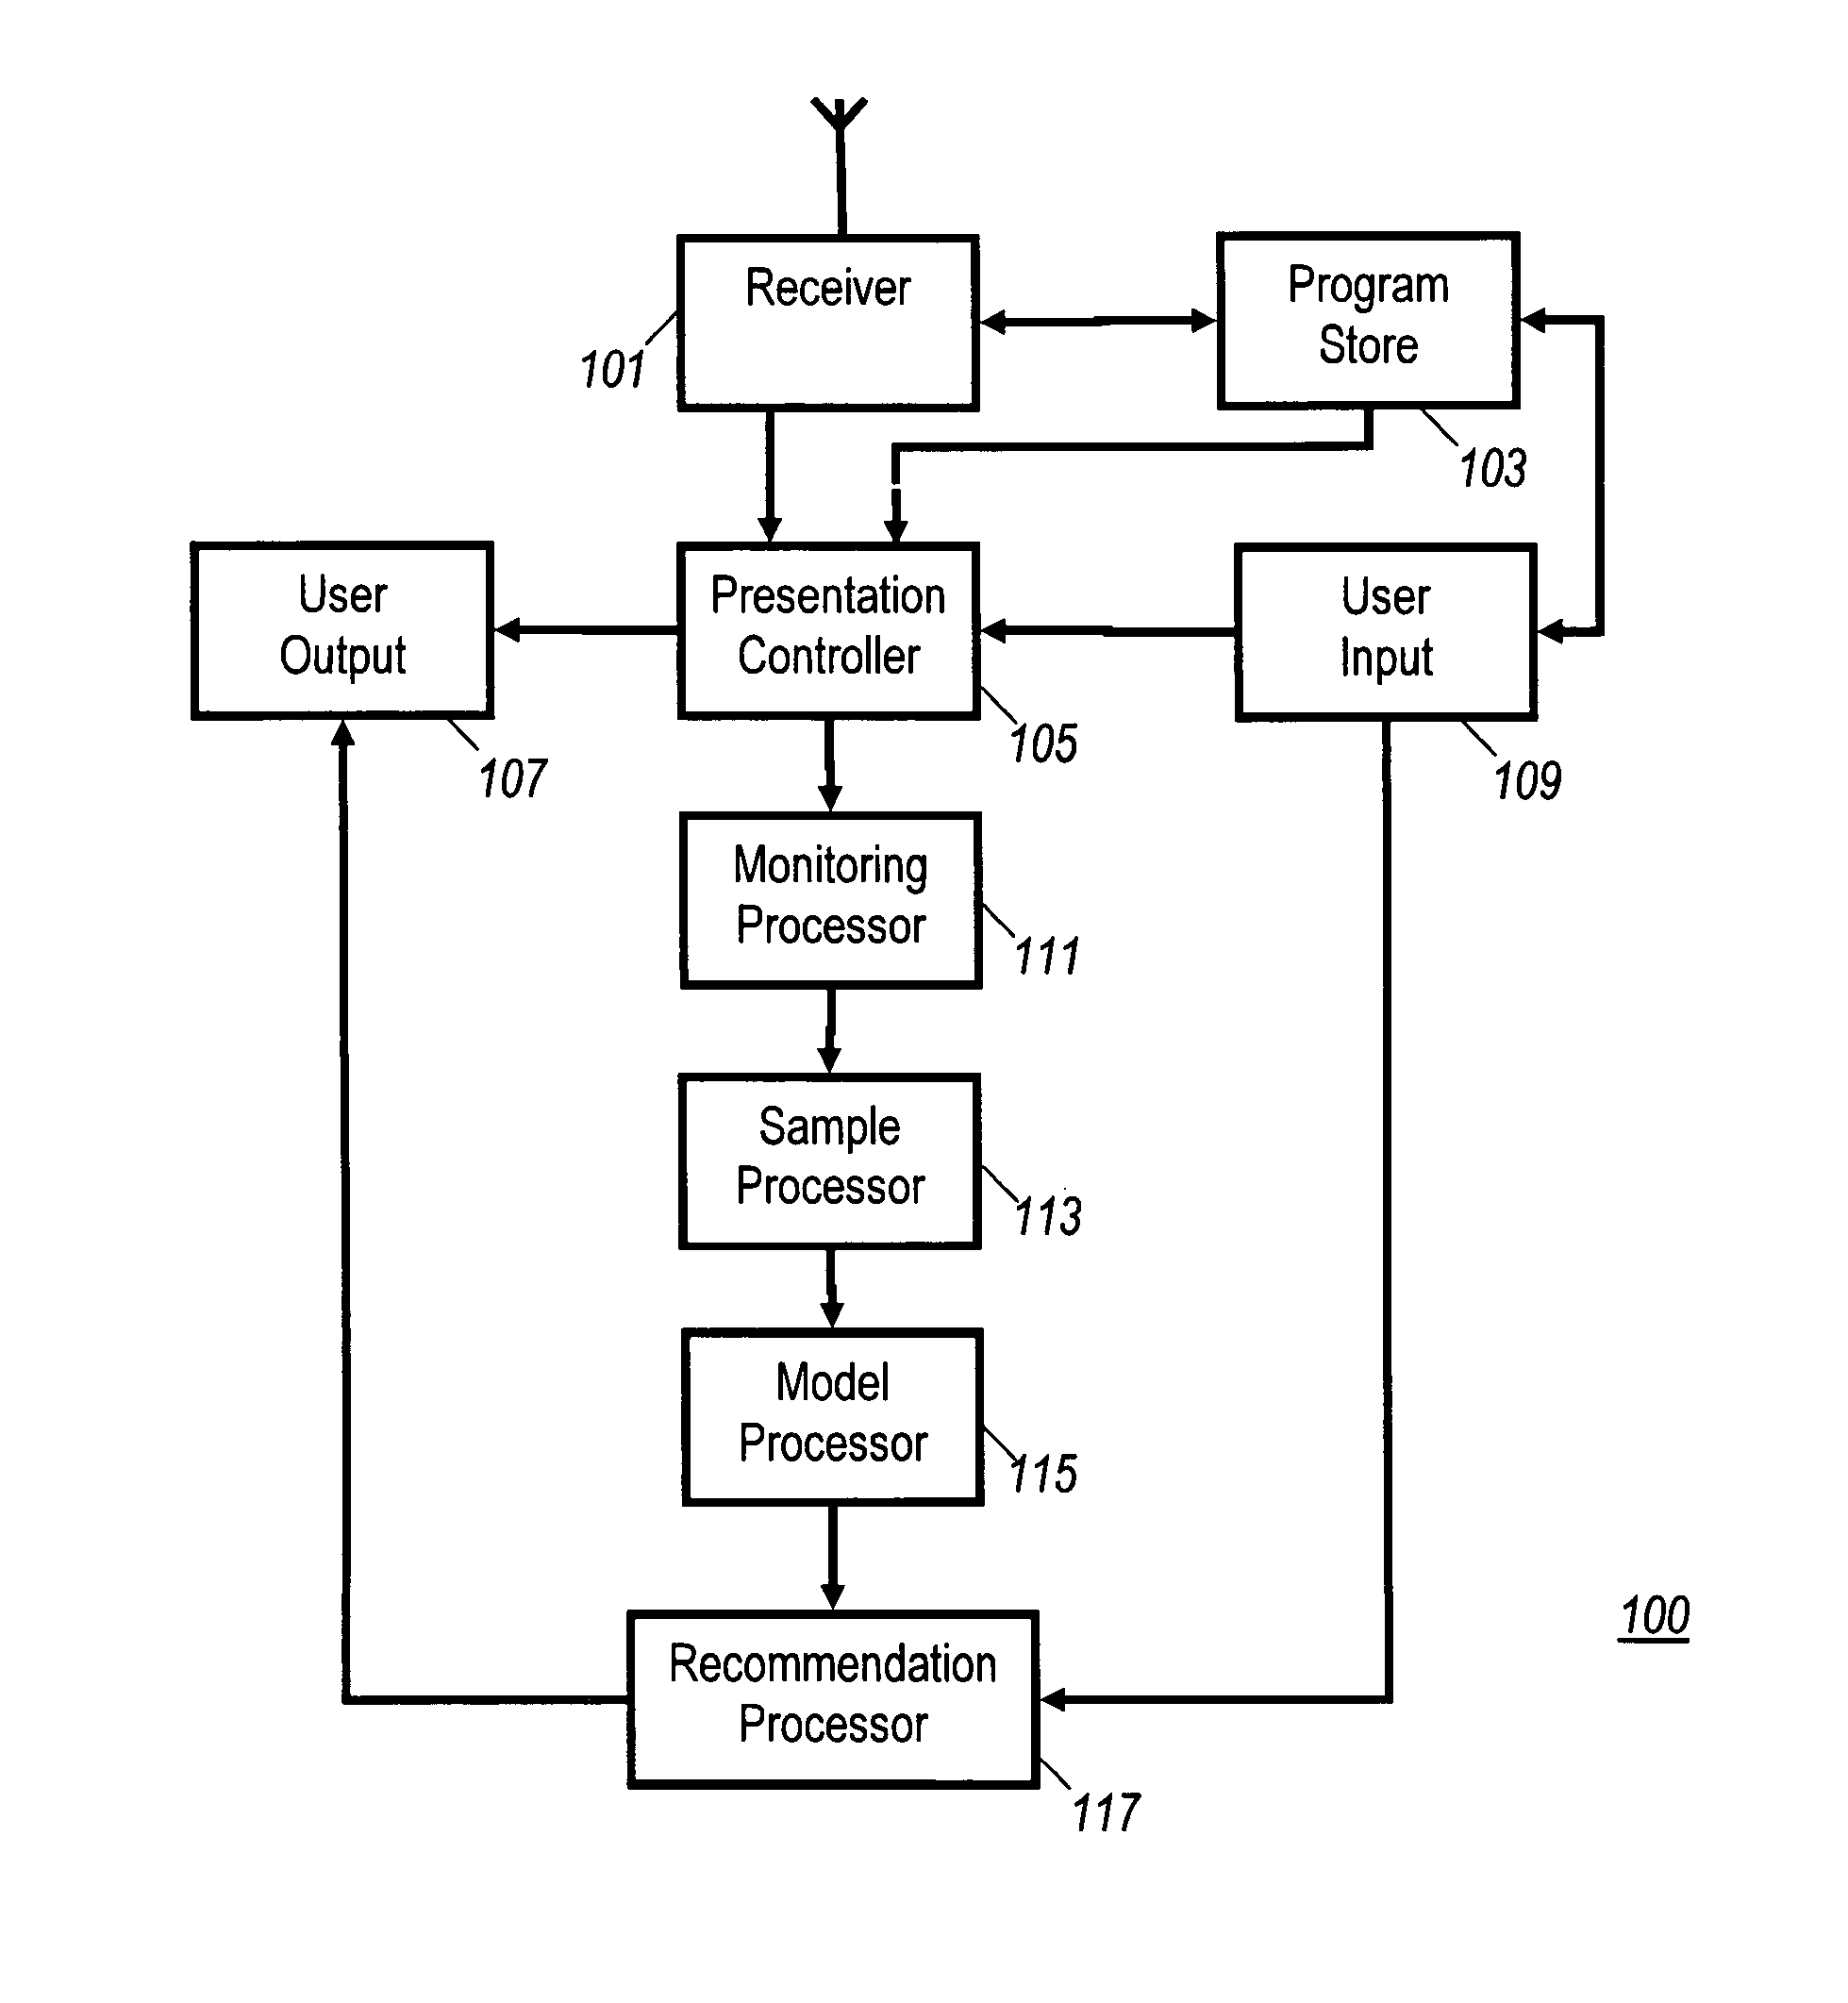 Method and apparatus for recommending content items